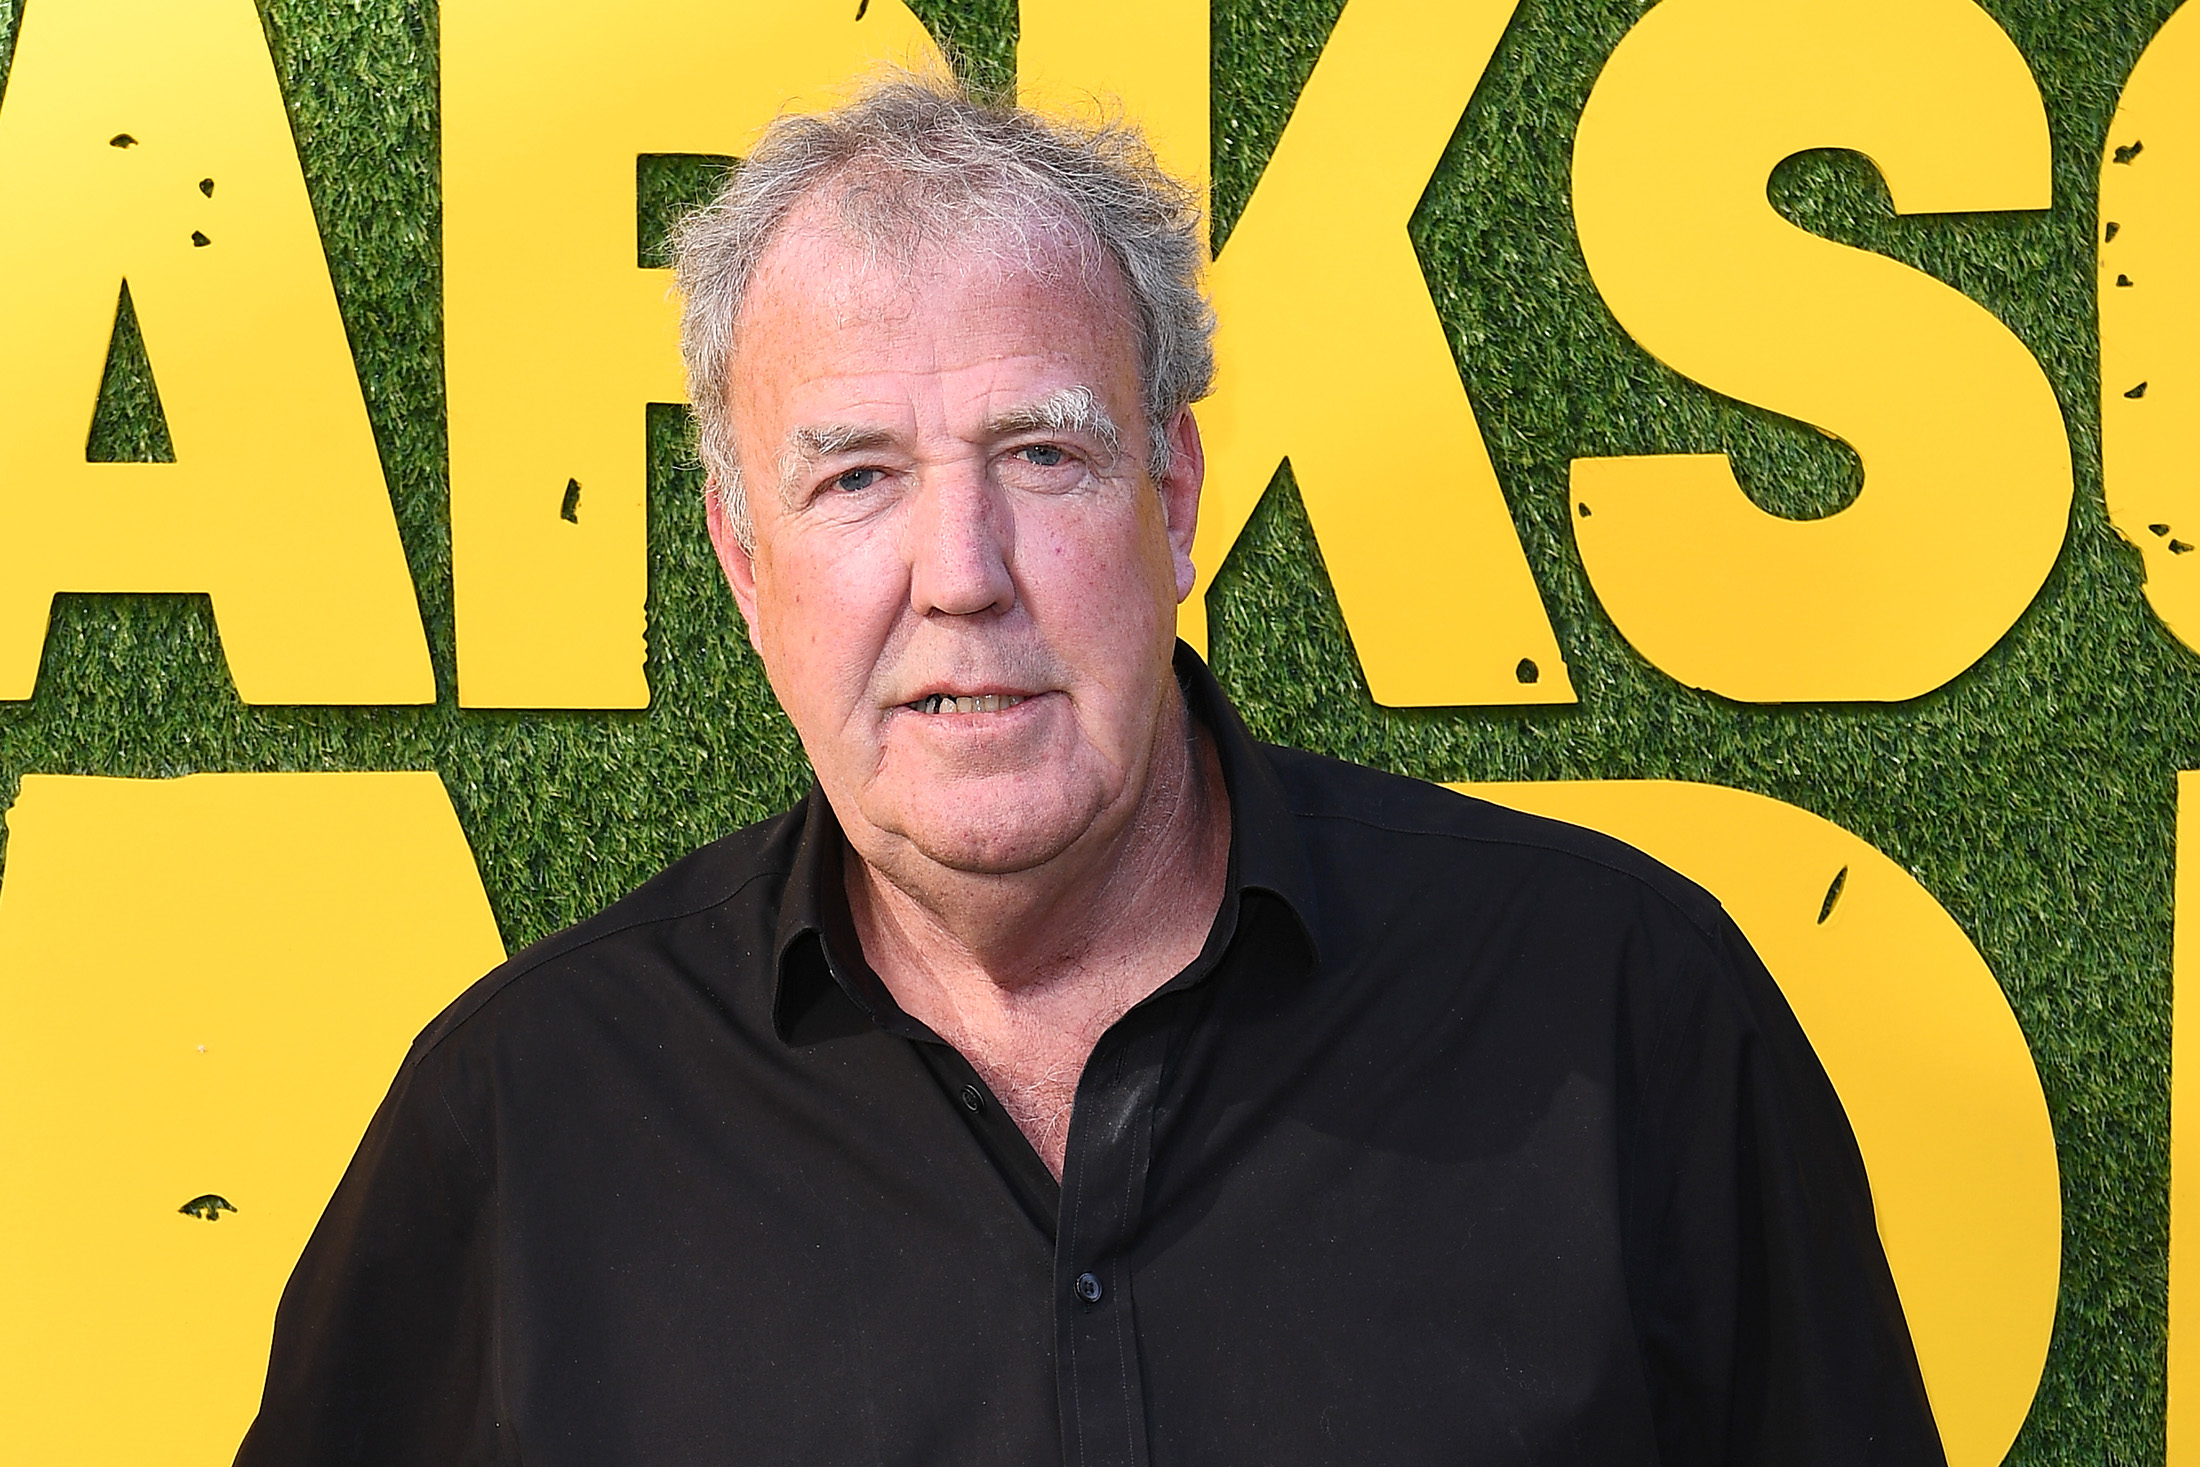 Mulls Jeremy Clarkson's Future After His Meghan Markle